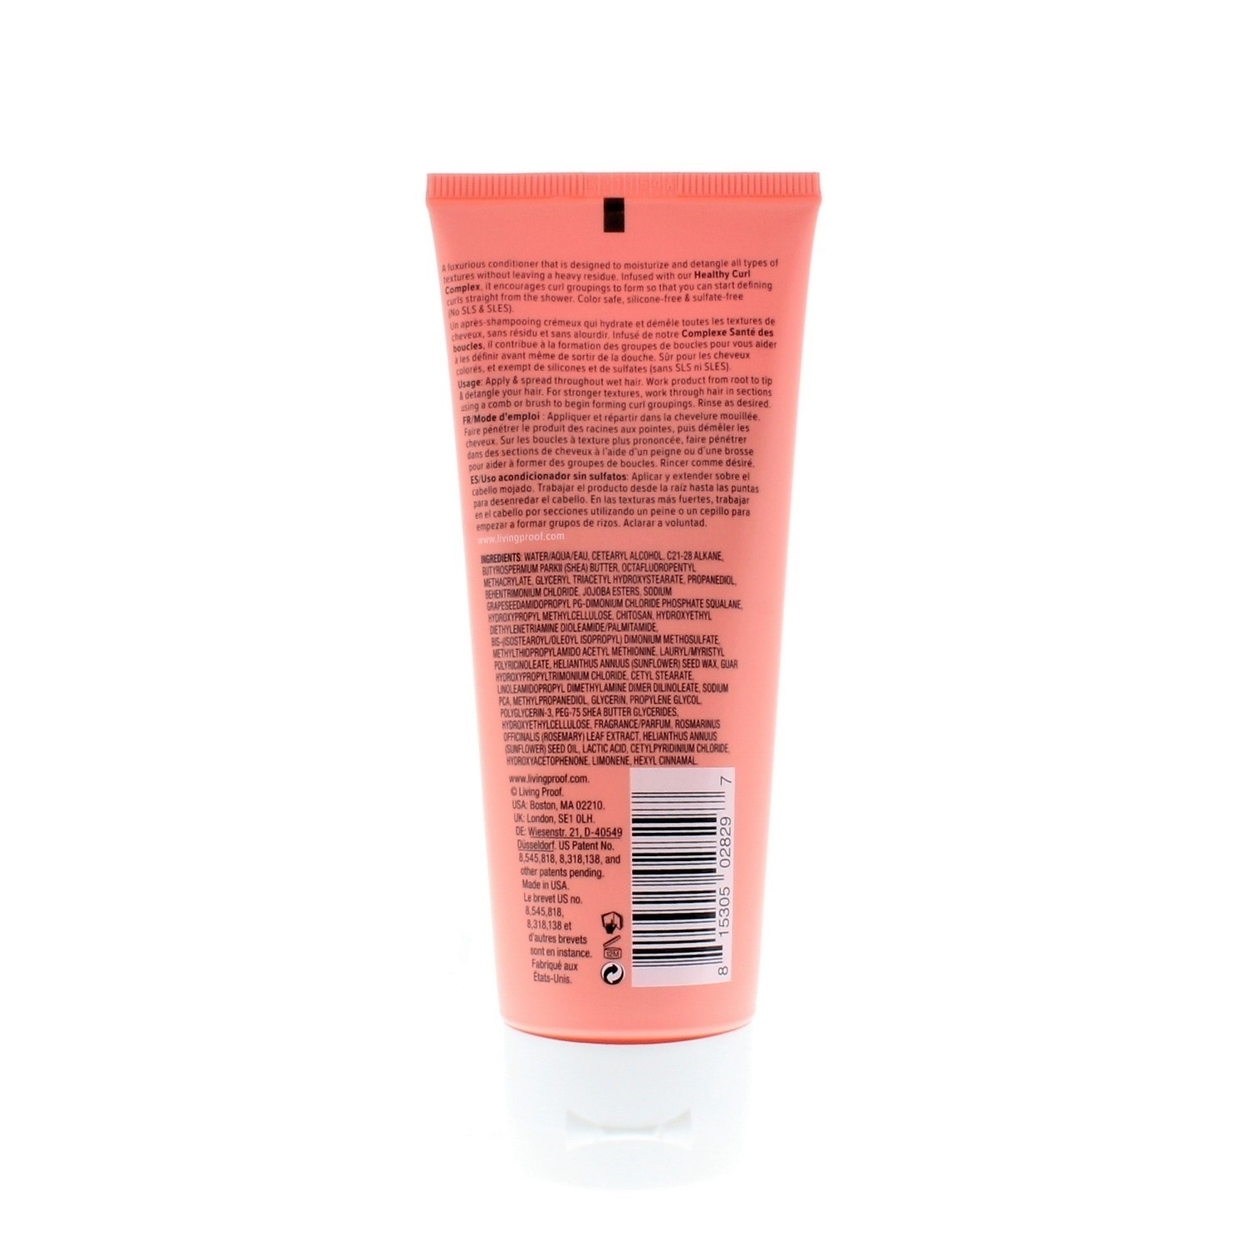 Living Proof Curl Conditioner 100ml/3.4oz